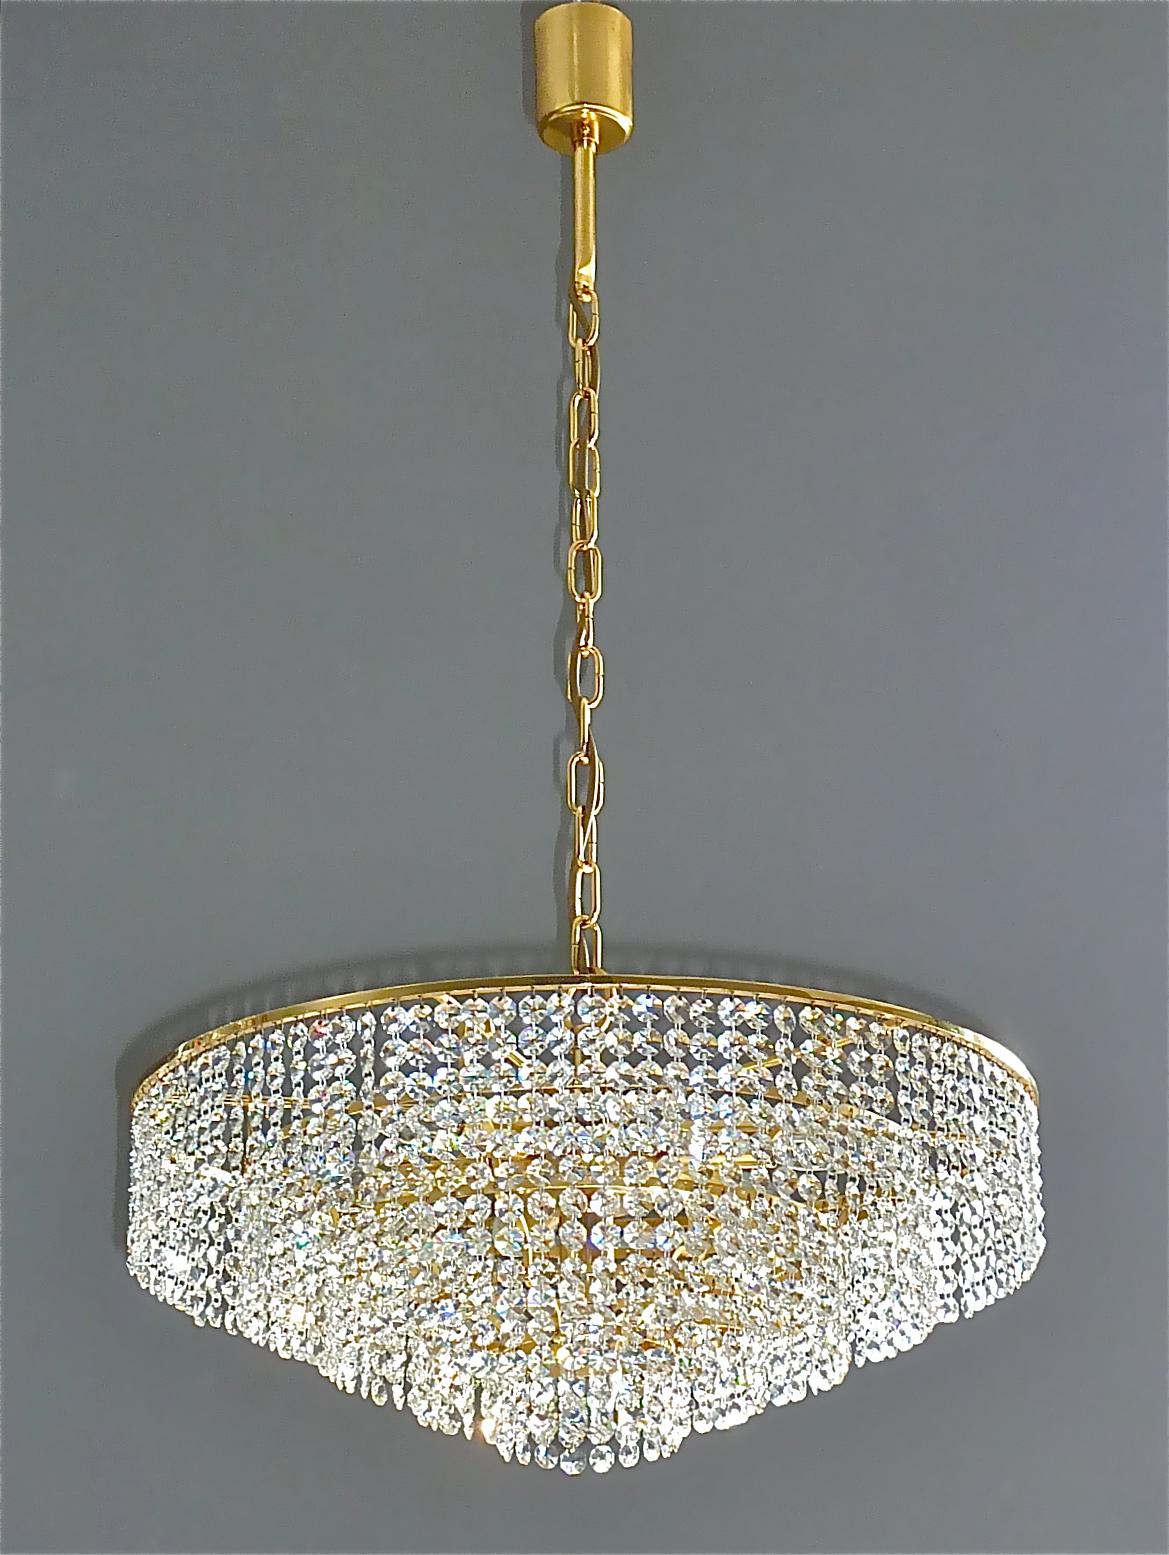 Classic large and precious gilt brass and crystal glass chandelier made by high class lighting company Palwa, Germany, circa 1960. The chain-hanging chandelier has 5 cascading tiers with lots of high lead hand-cut faceted crystal glass strings which